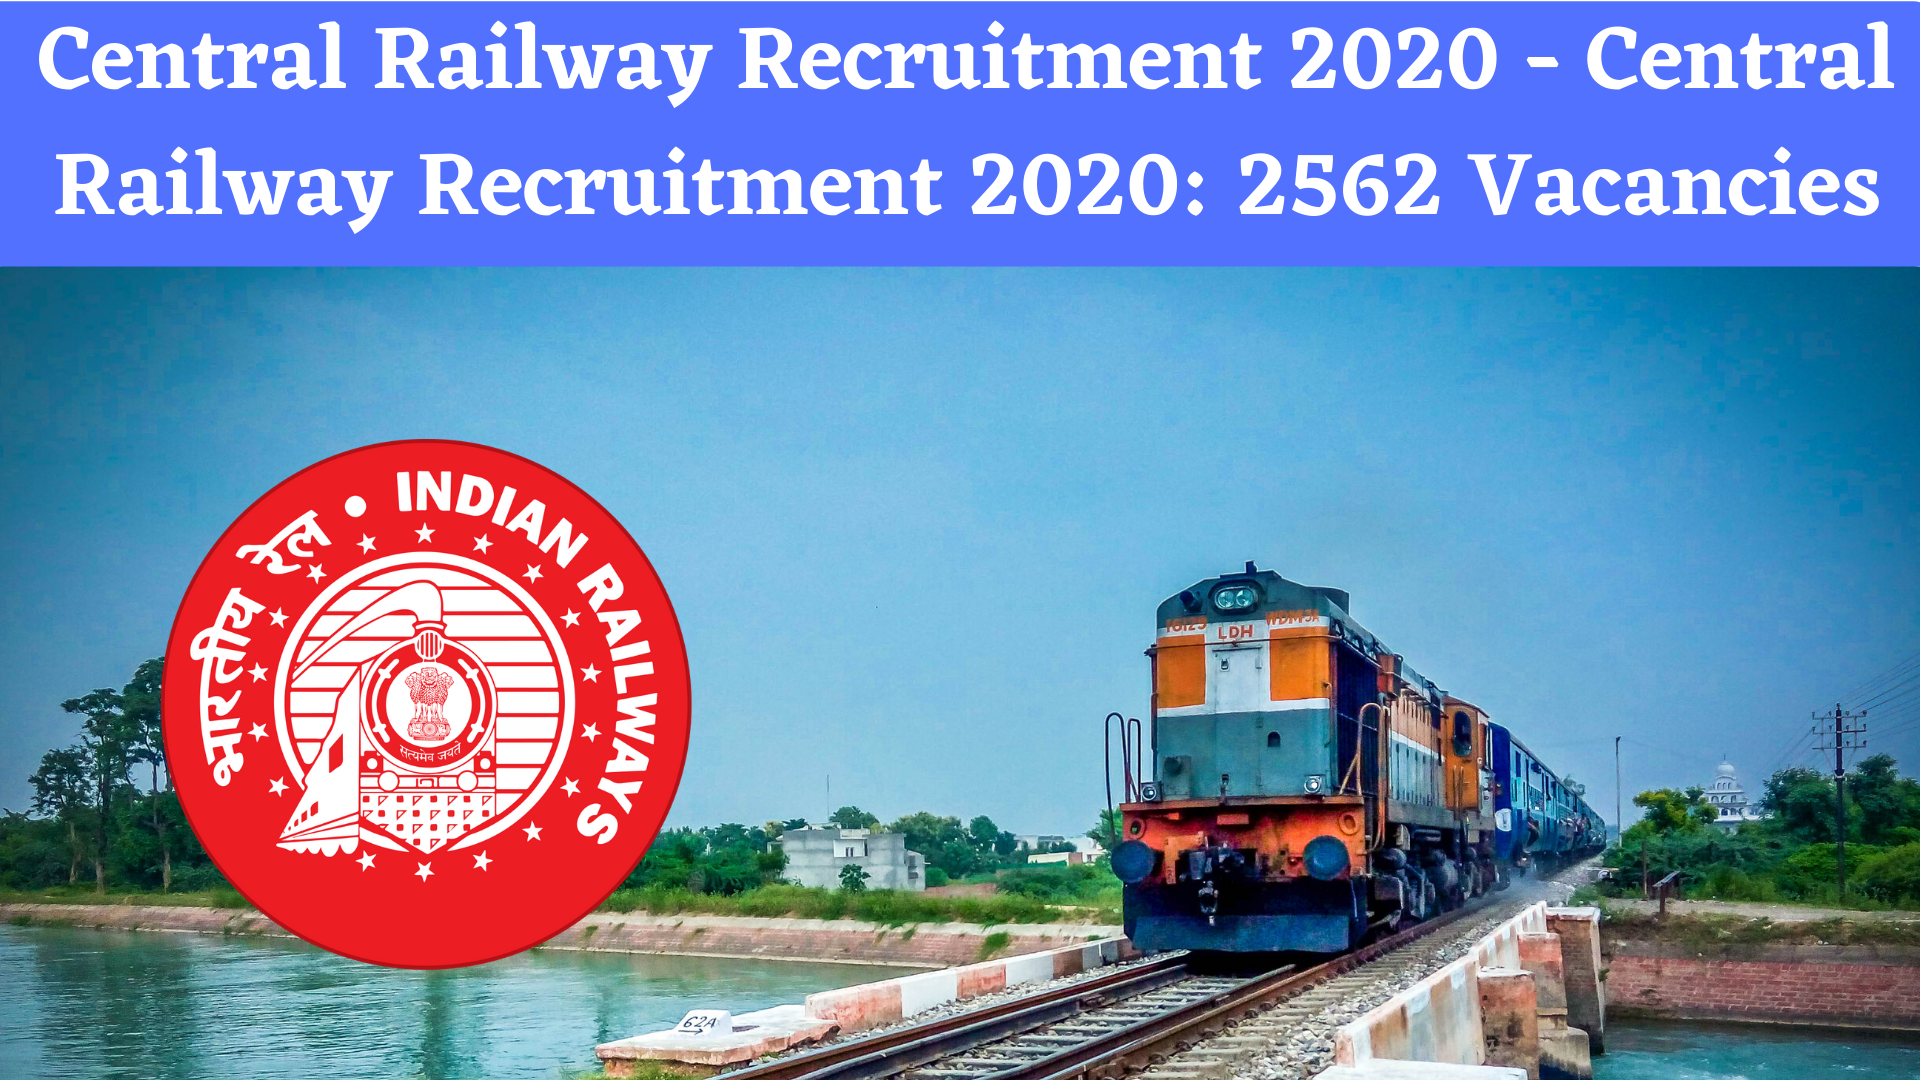 Central Railway Recruitment 2019 ». Junior Clerk Jobs 2019. ... On 18/12/2019, Central Railway announced Job notification to hire candidates who completed 12TH, Any Graduate for the position of Junior Clerk, Senior Clerk.To Apply for the job posting from Central Railway, please click .